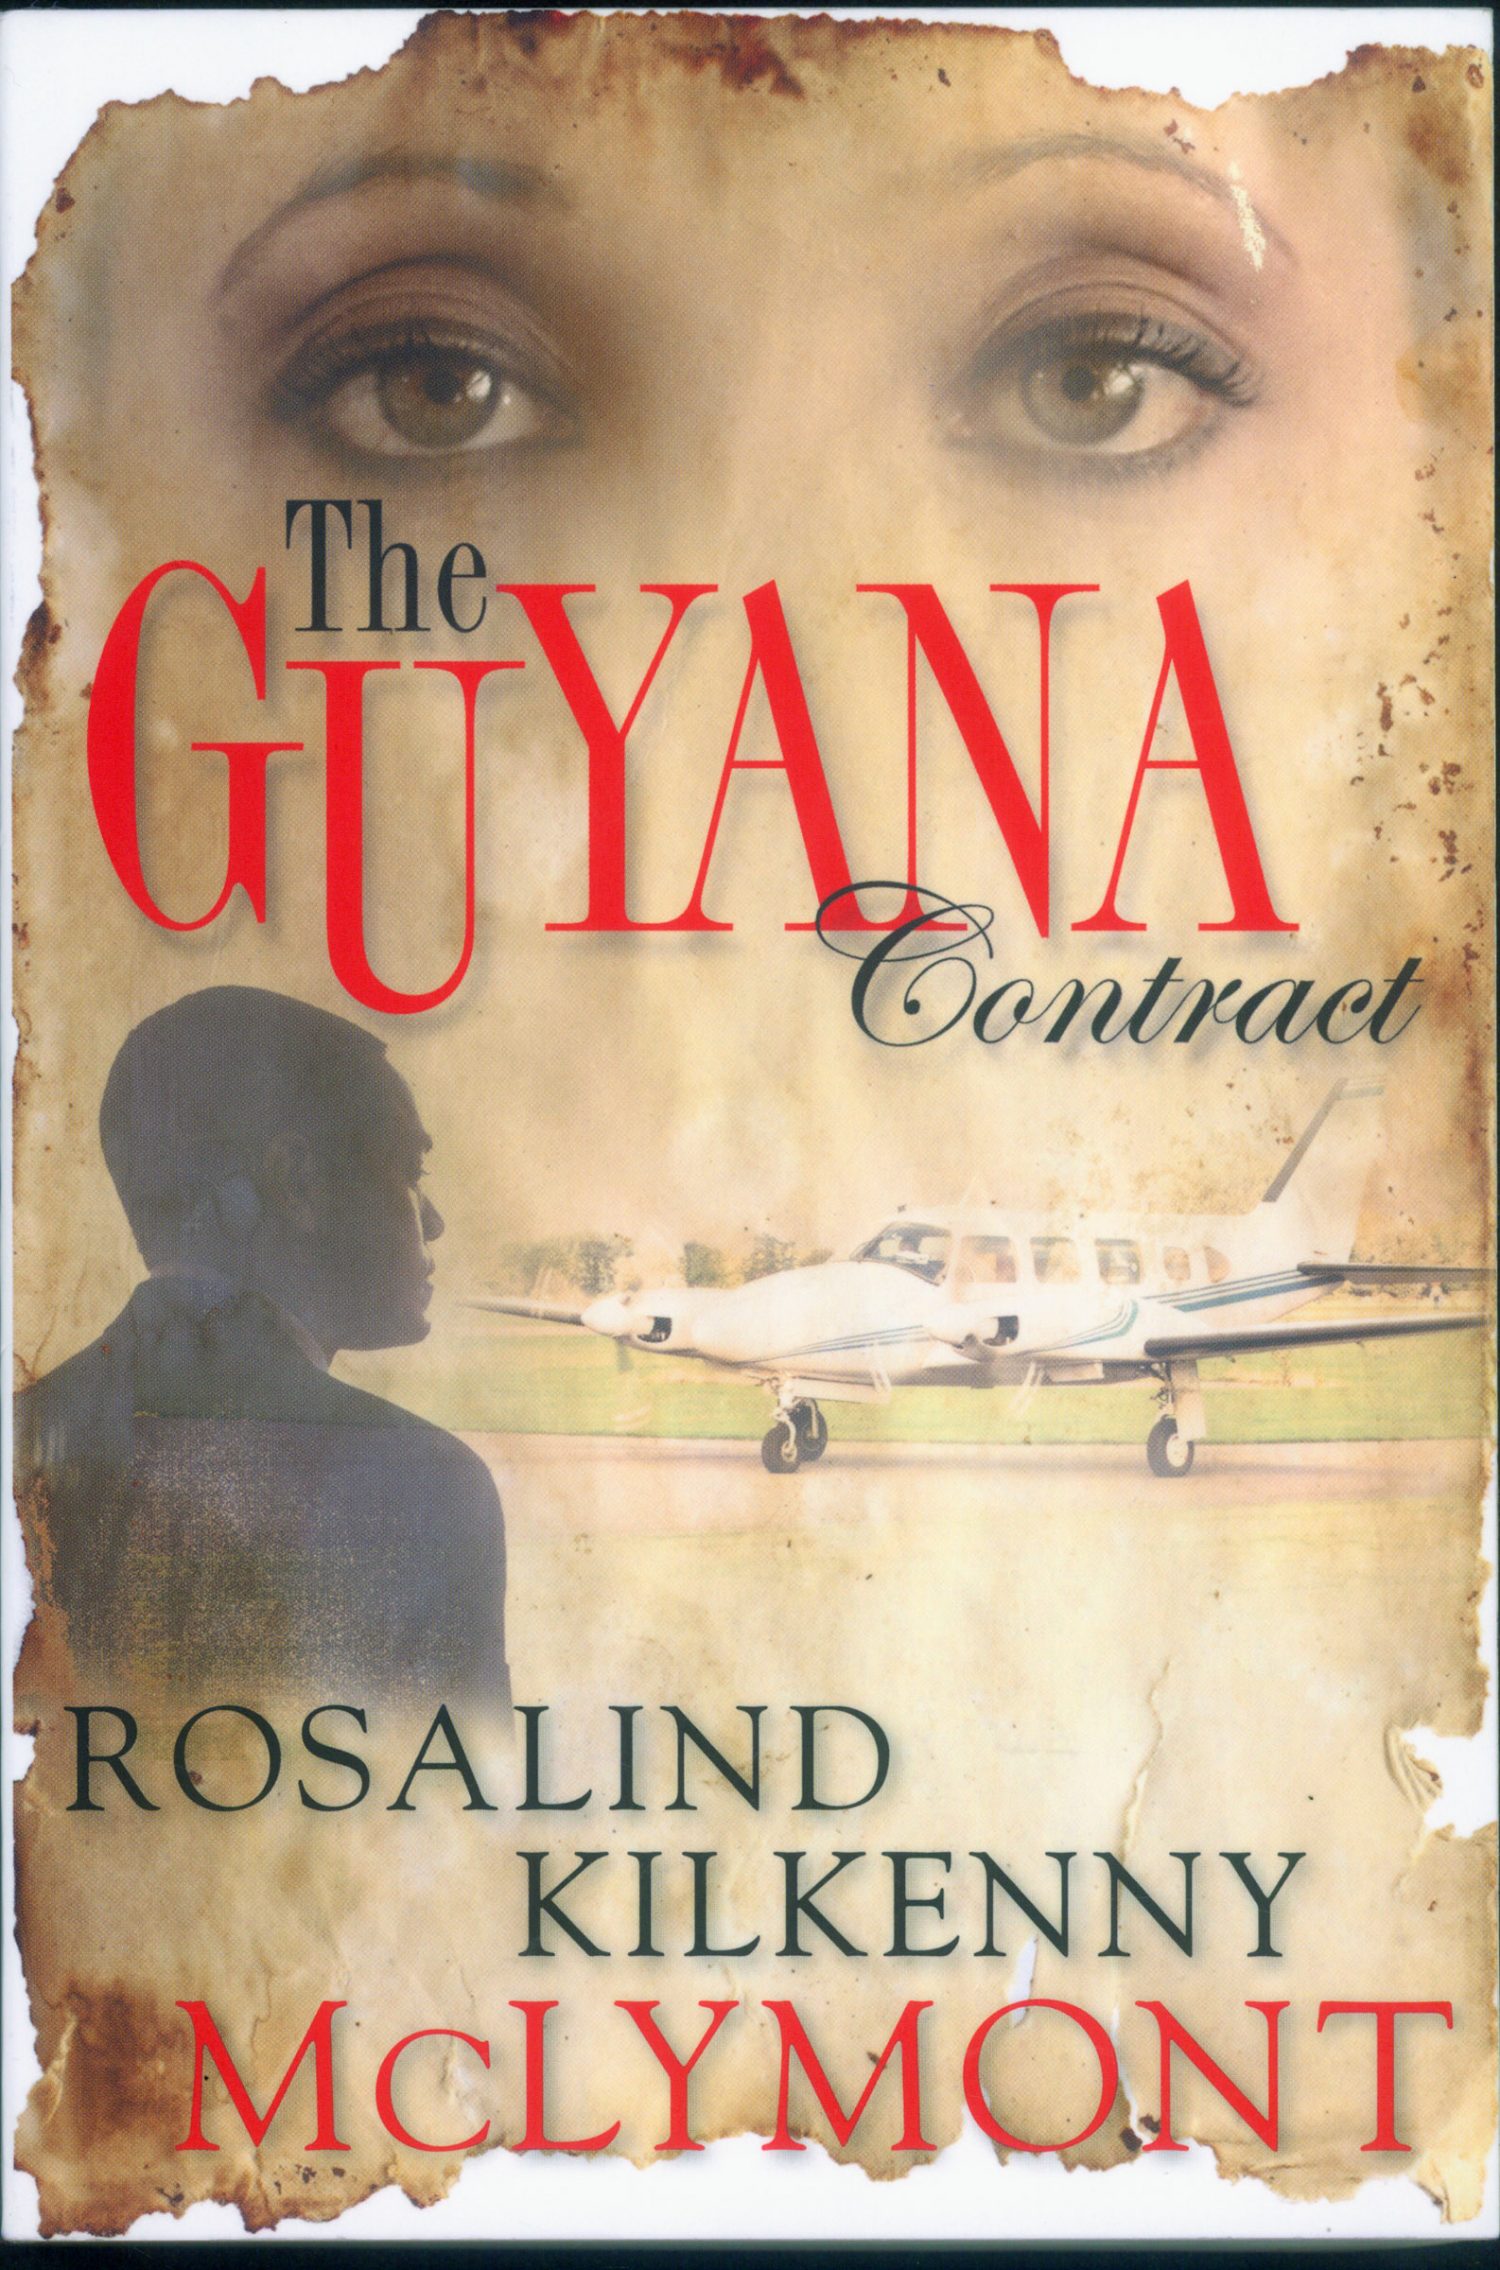 (Rosalind Kilkenny, The Guyana Contract, New York, The Network Journal, 2015. 369p.)